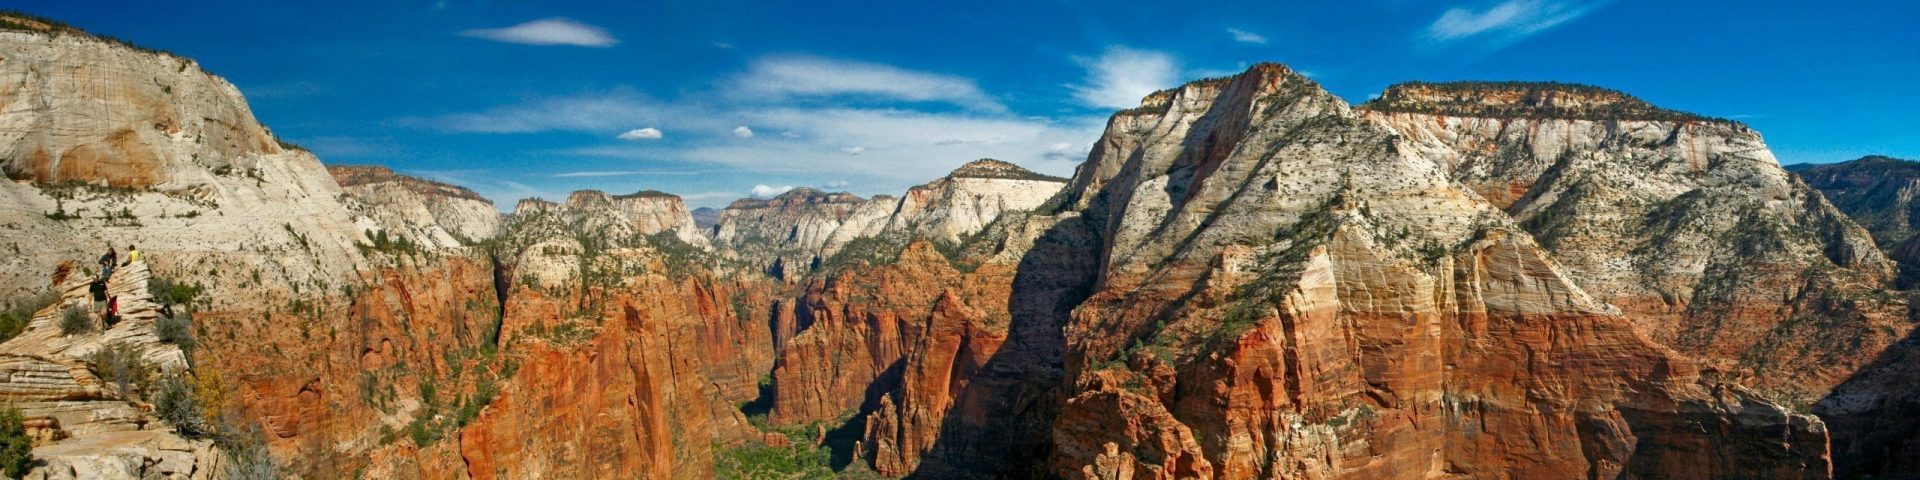 16+ National Parks Self-Guided Driving Tours Bundle